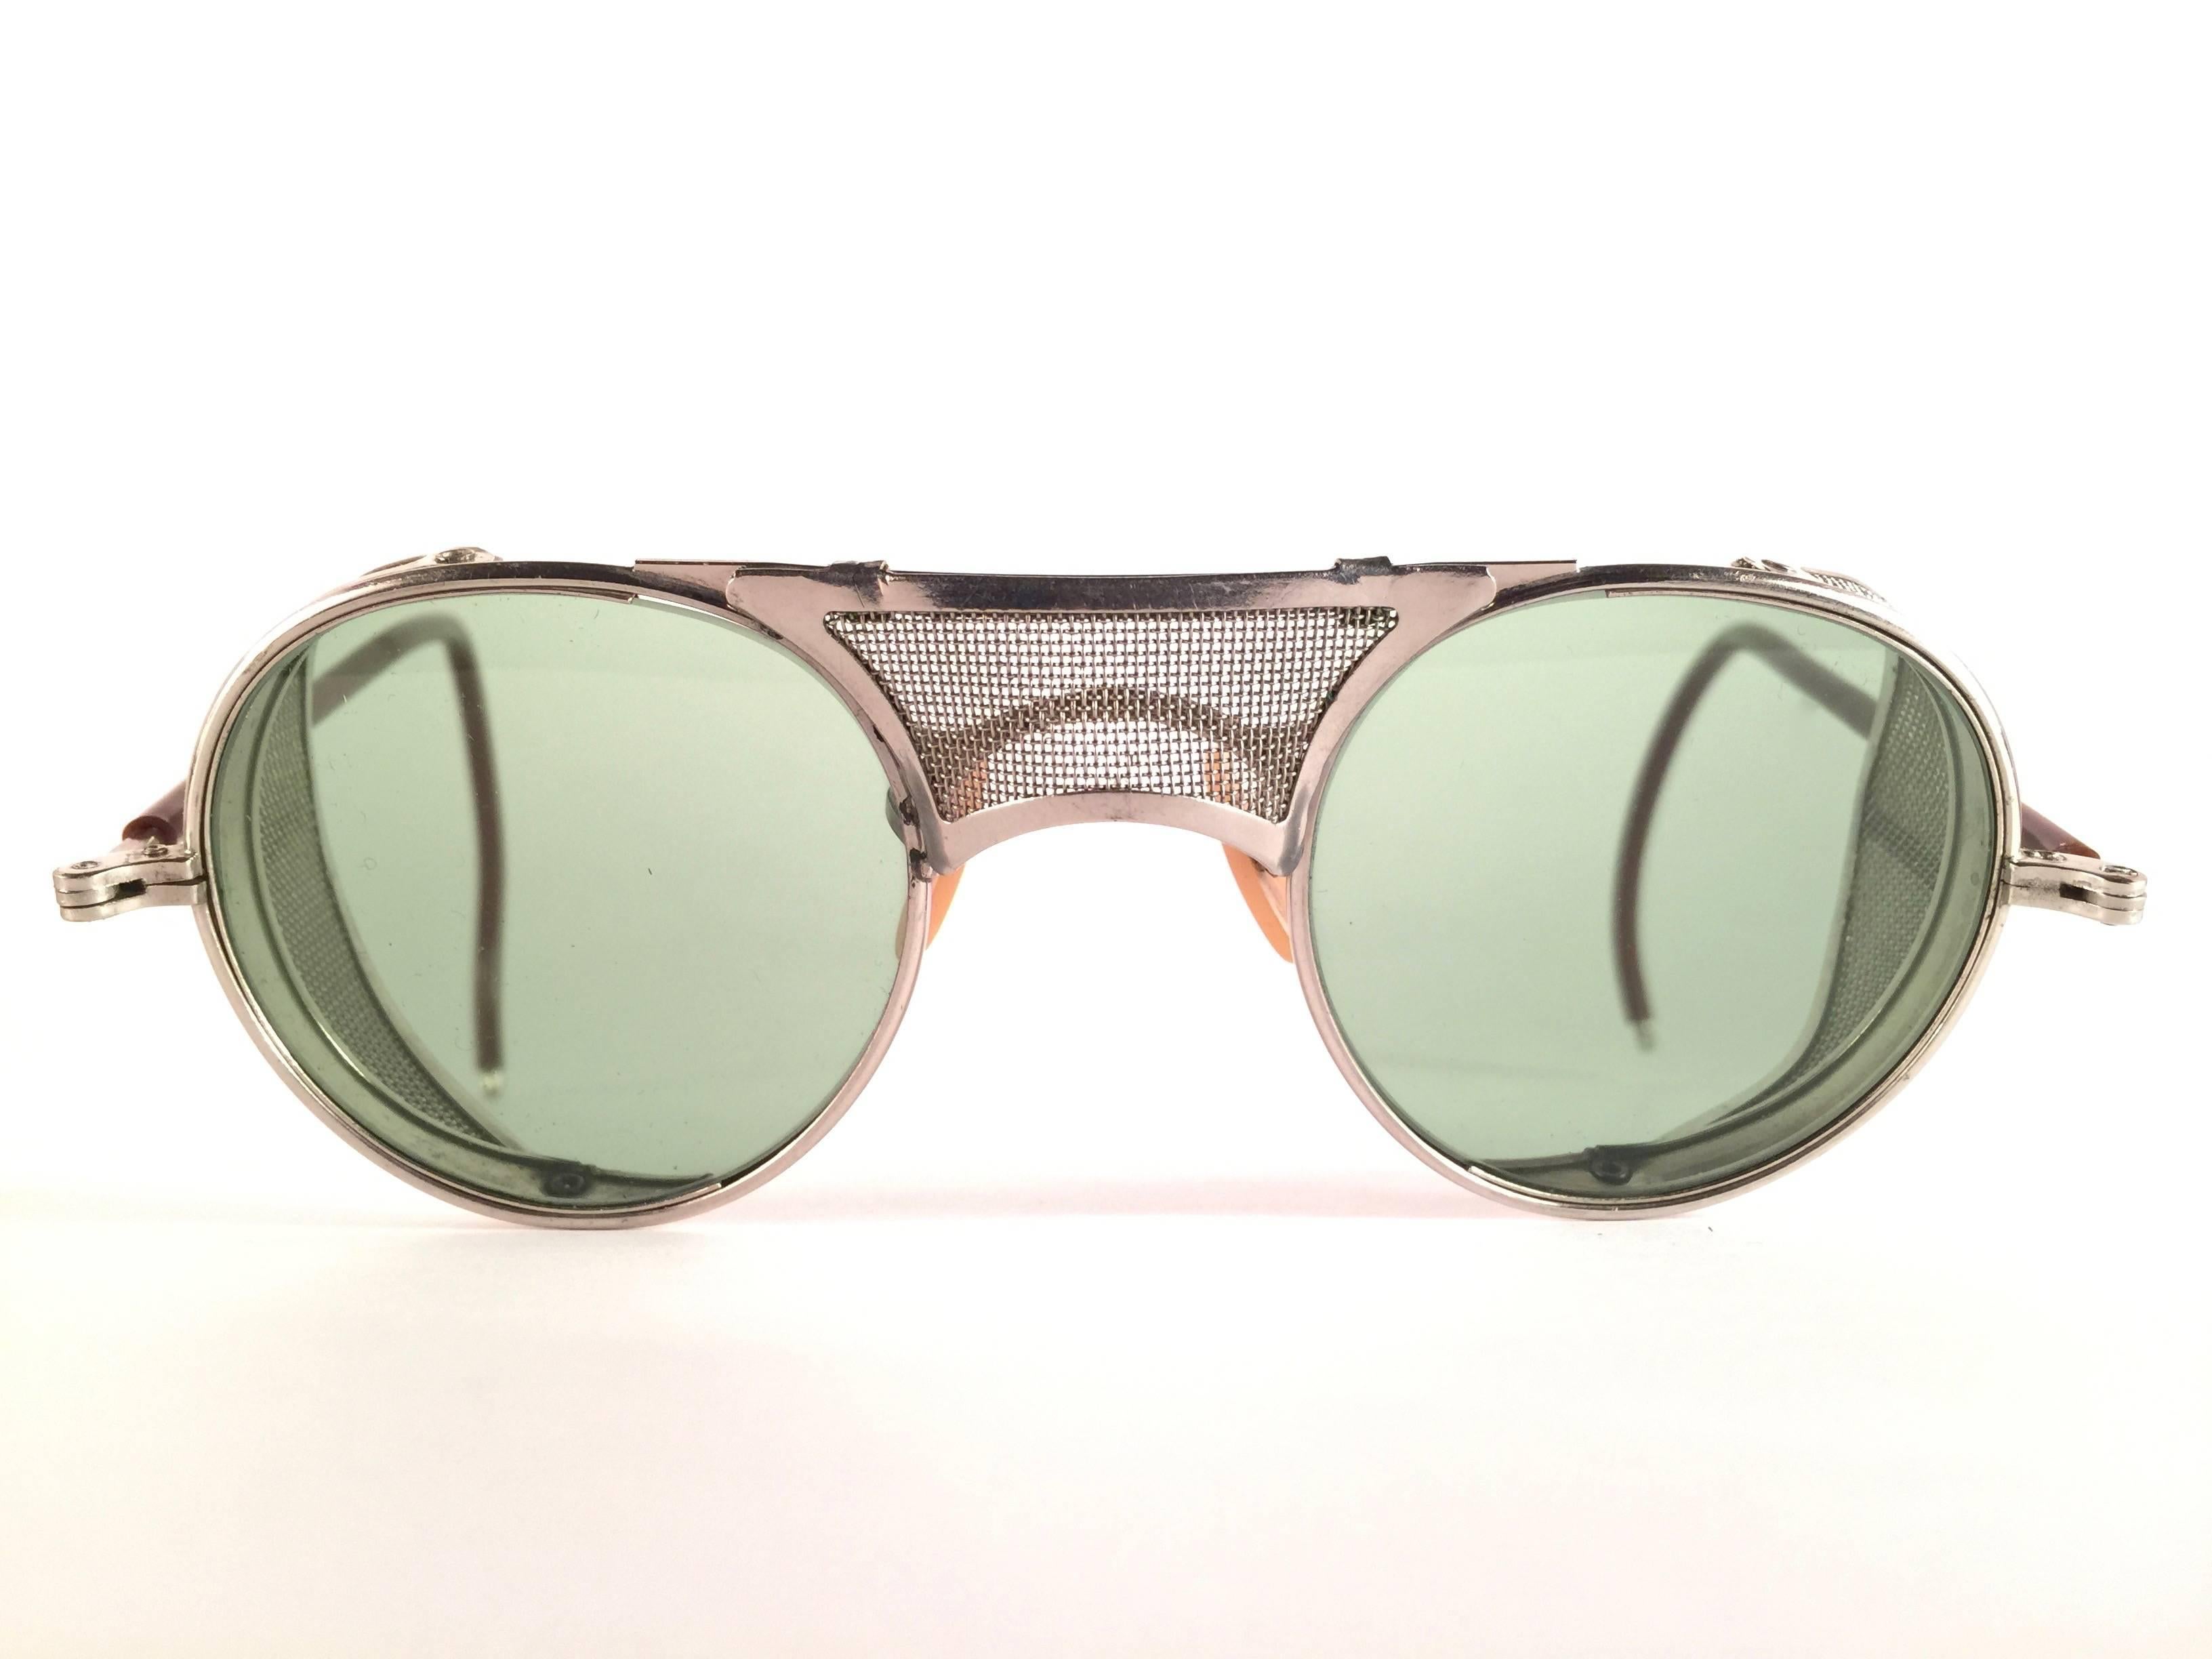 Gray New Vintage Bausch & Lomb Goggles Steampunk 1950's Collectors Item Sunglasses 